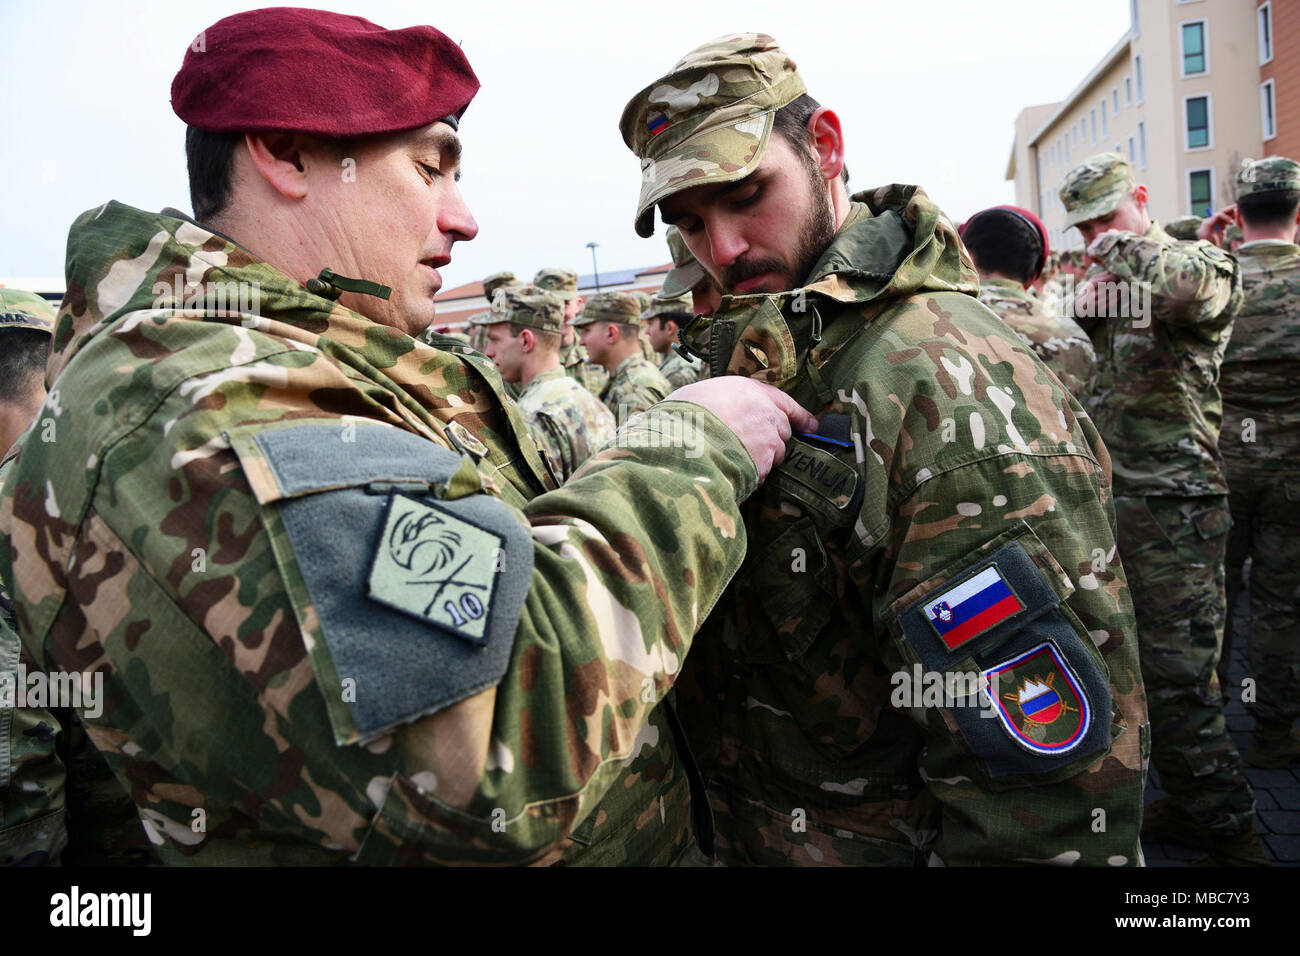 A Slovenian Army Soldier pins the Expert Infantryman Badge (EIB) on another Slovenian Army Soldier during the Expert Infantryman Badge (EIB) ceremony at Caserma Del Din, Vicenza, Italy, 15 Feb. 2018. (U.S. Army Stock Photo